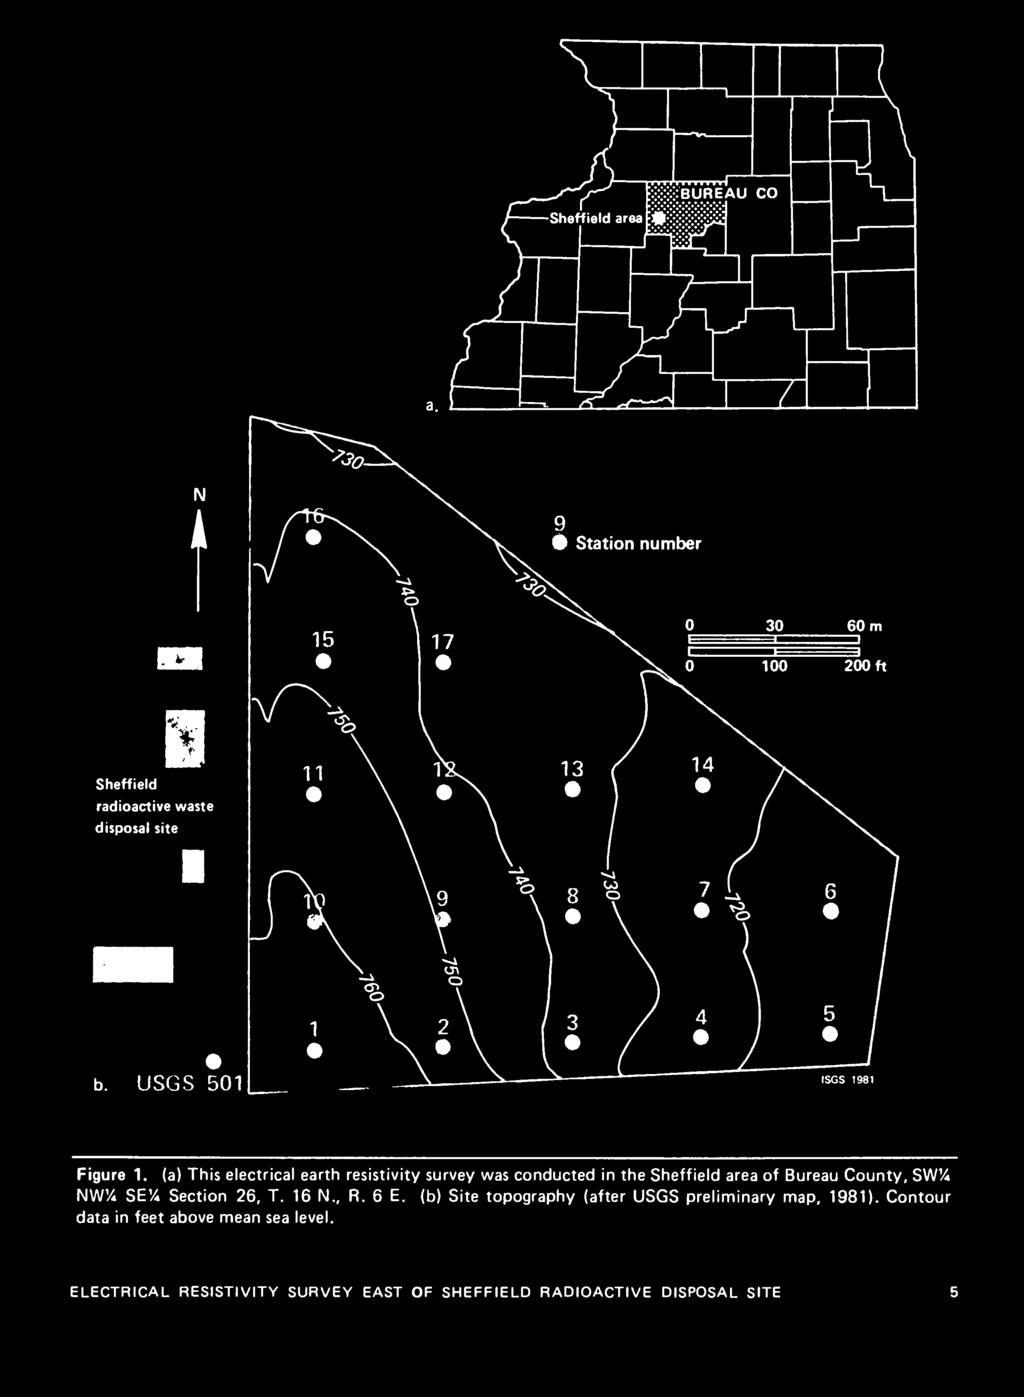 (b) Site topography (after USGS preliminary map, 1981).